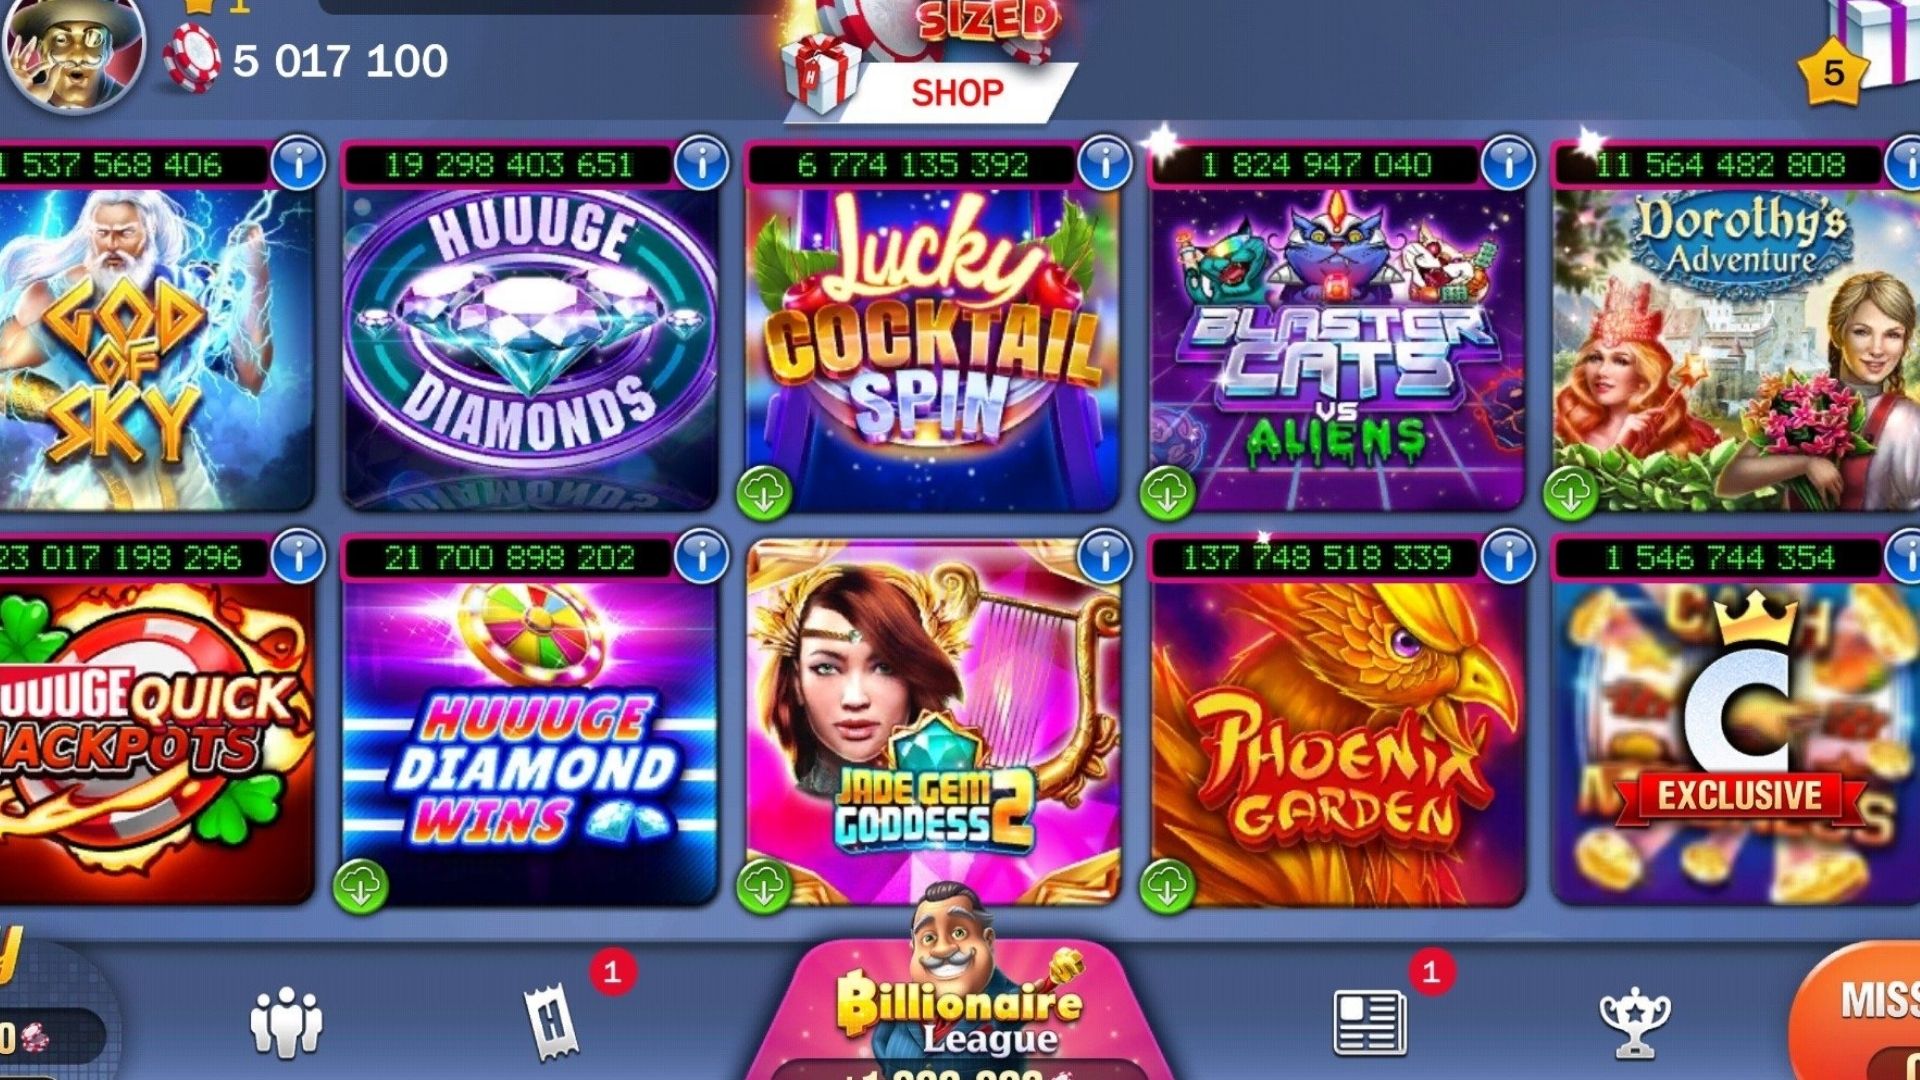 What Does New Online Casino 2022 - Set Filters To Find Your New Casino Do?